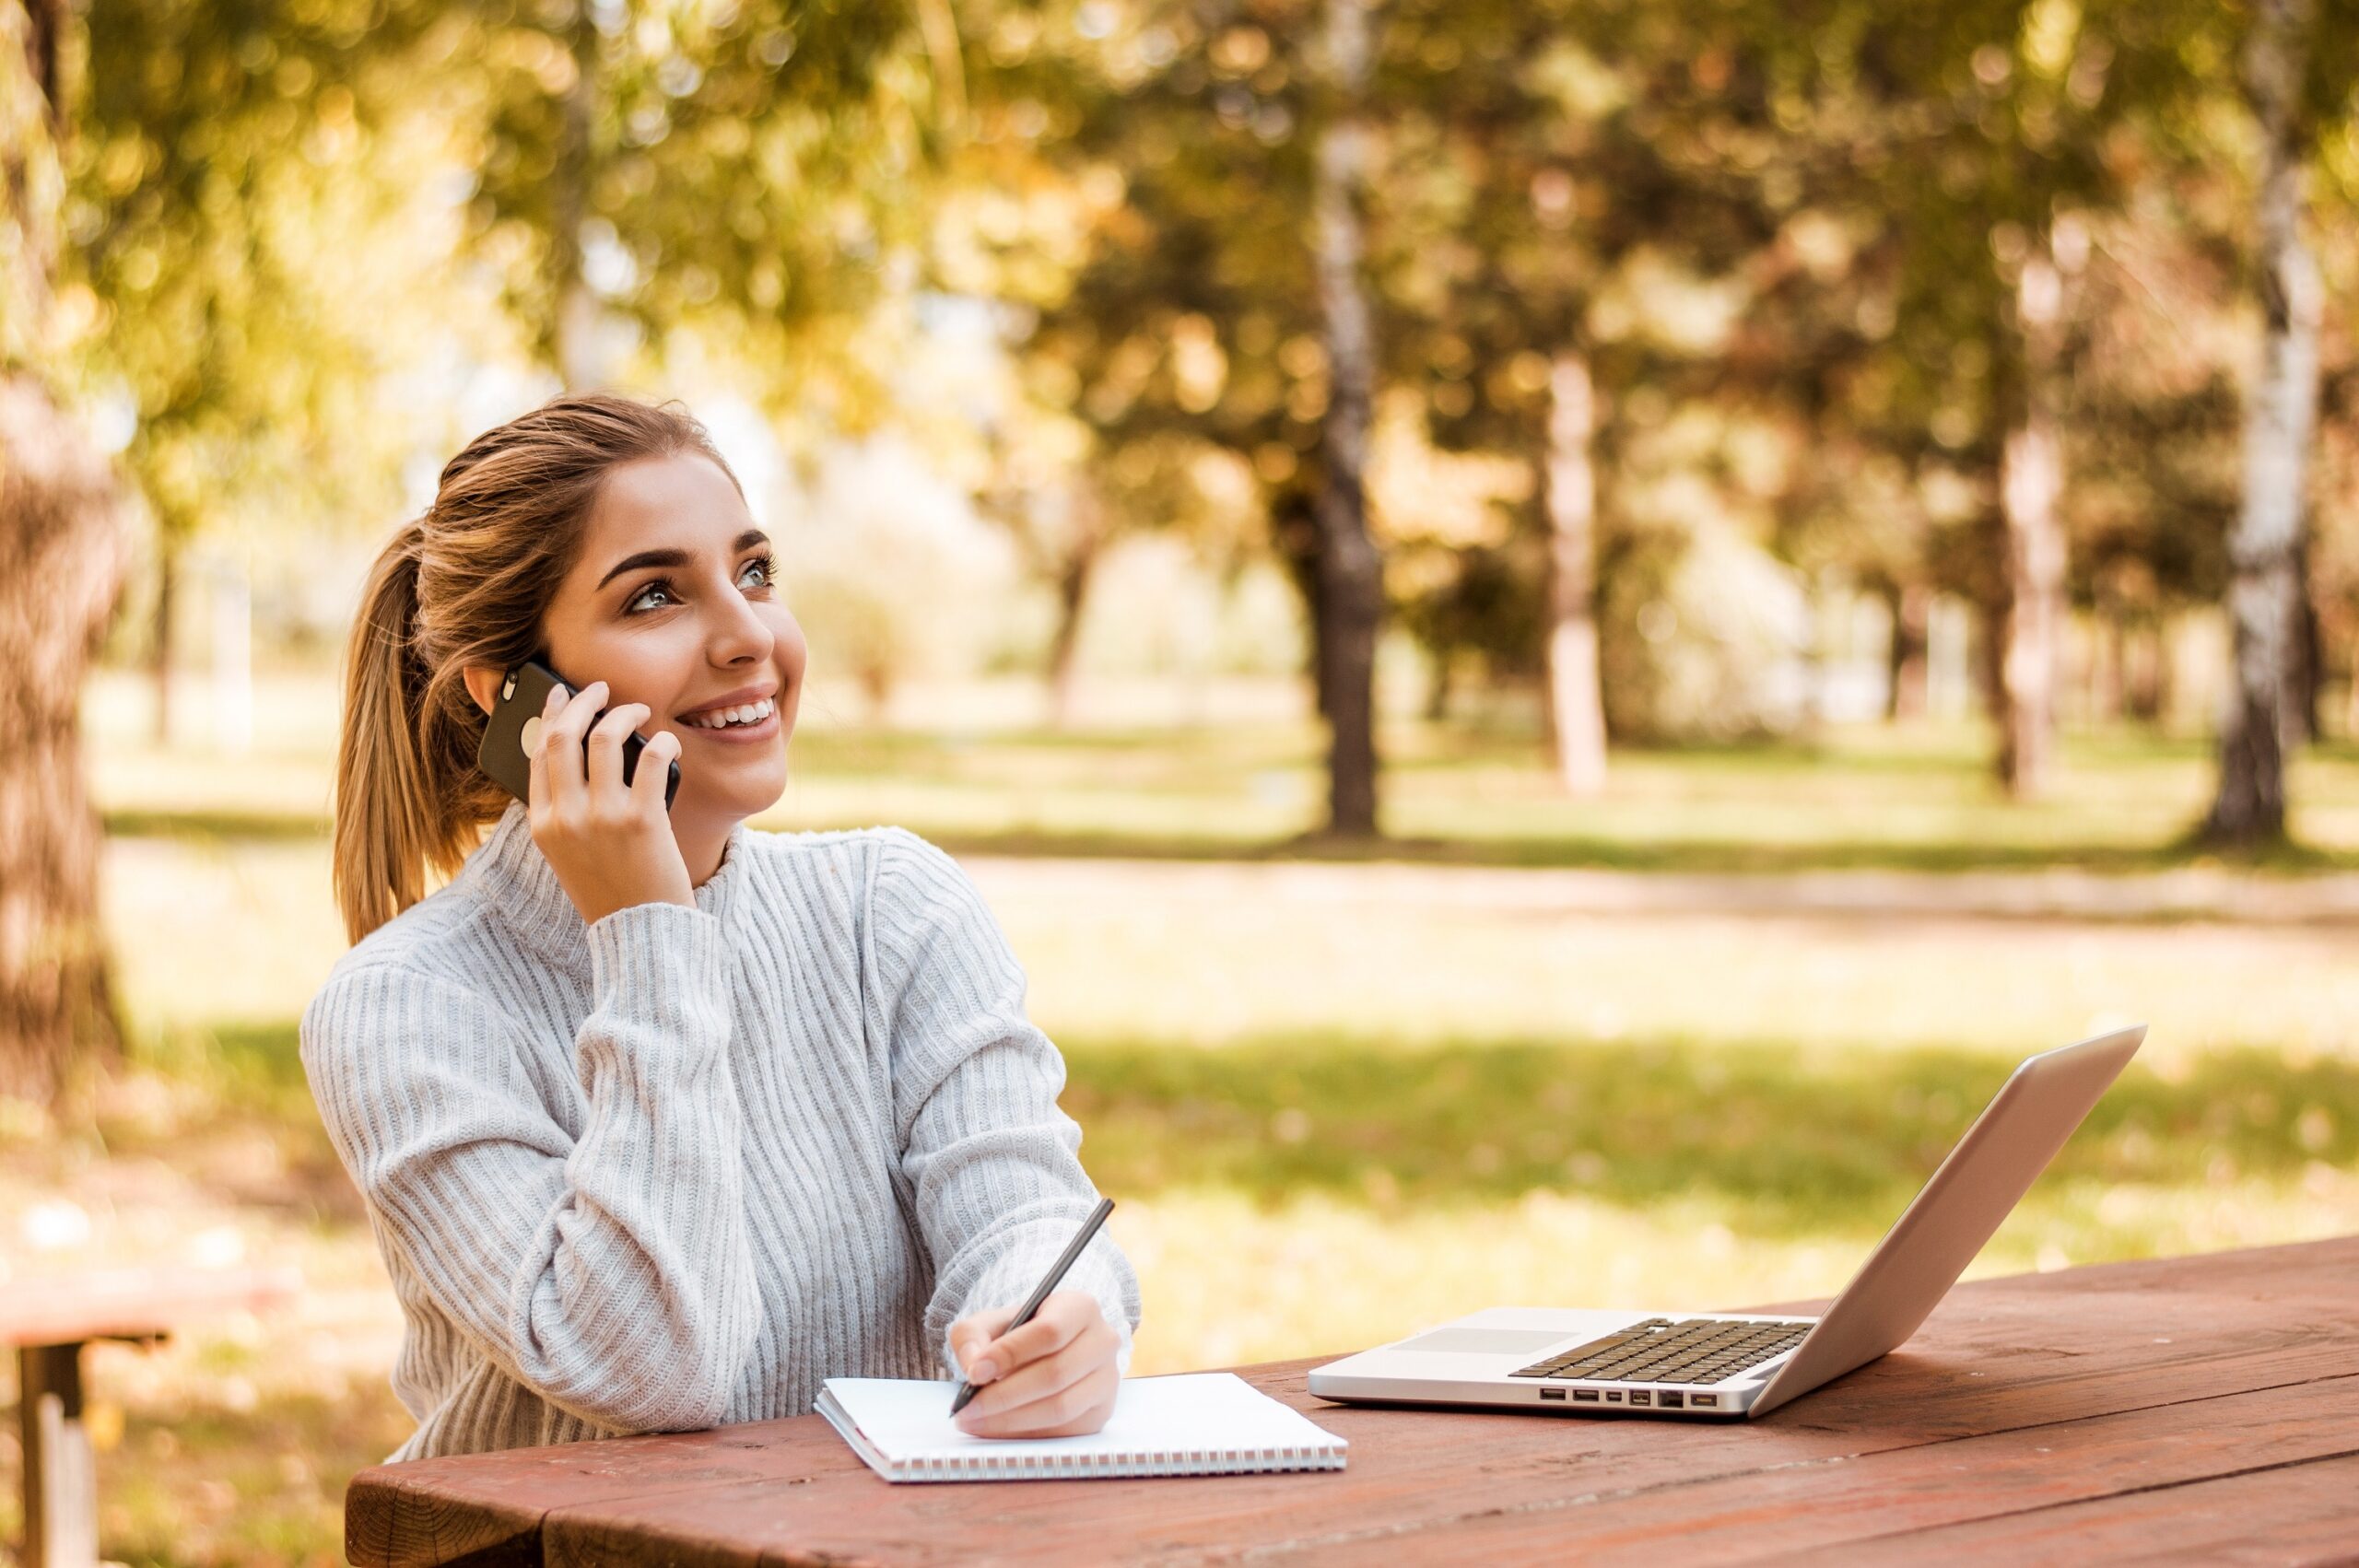 Young blonde woman talking on phone while taking notes outside.